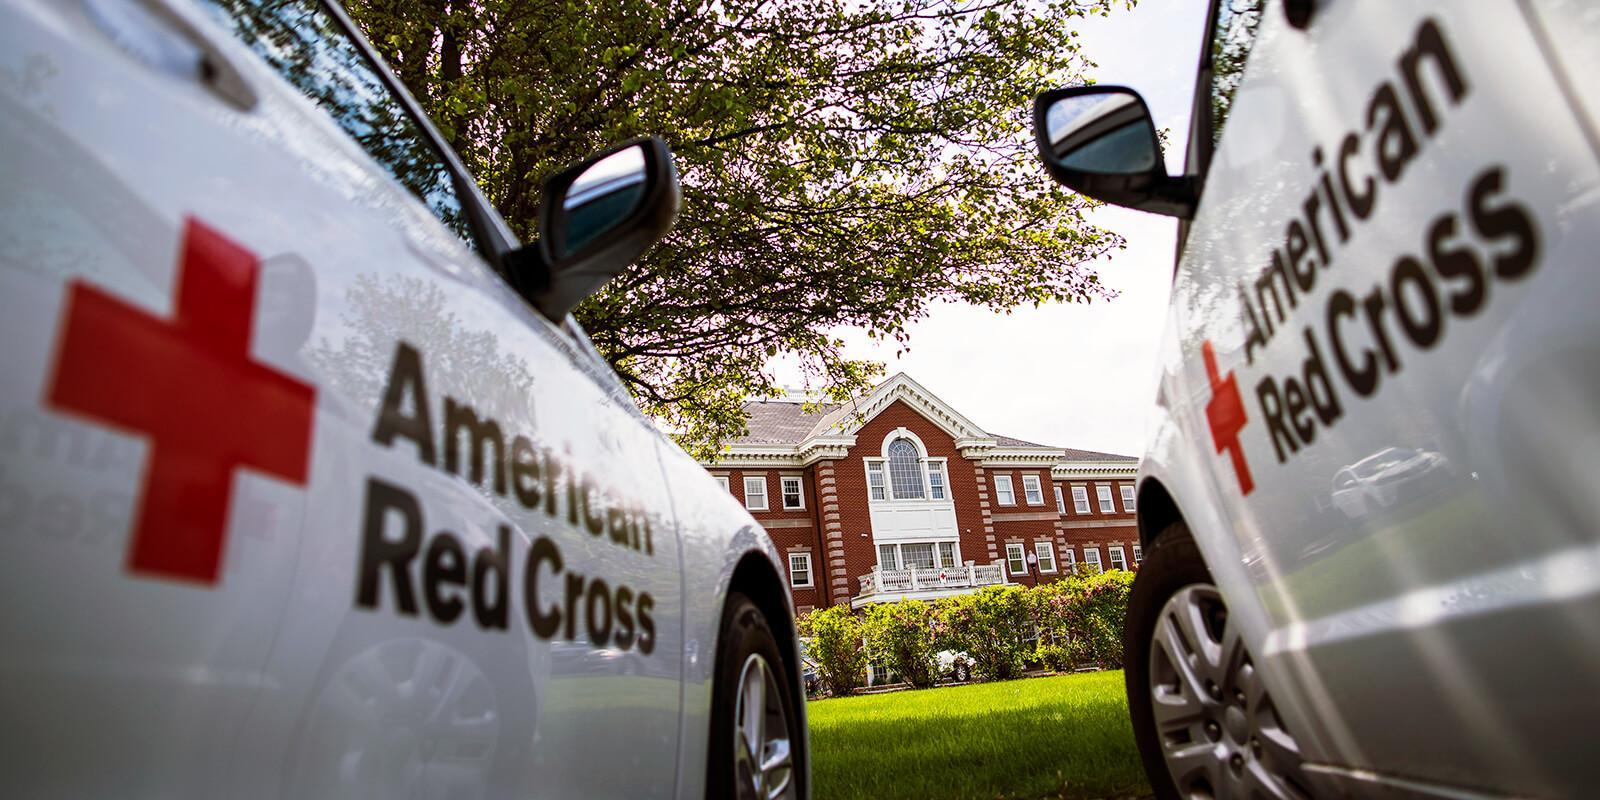 Photo of a Red Cross car.